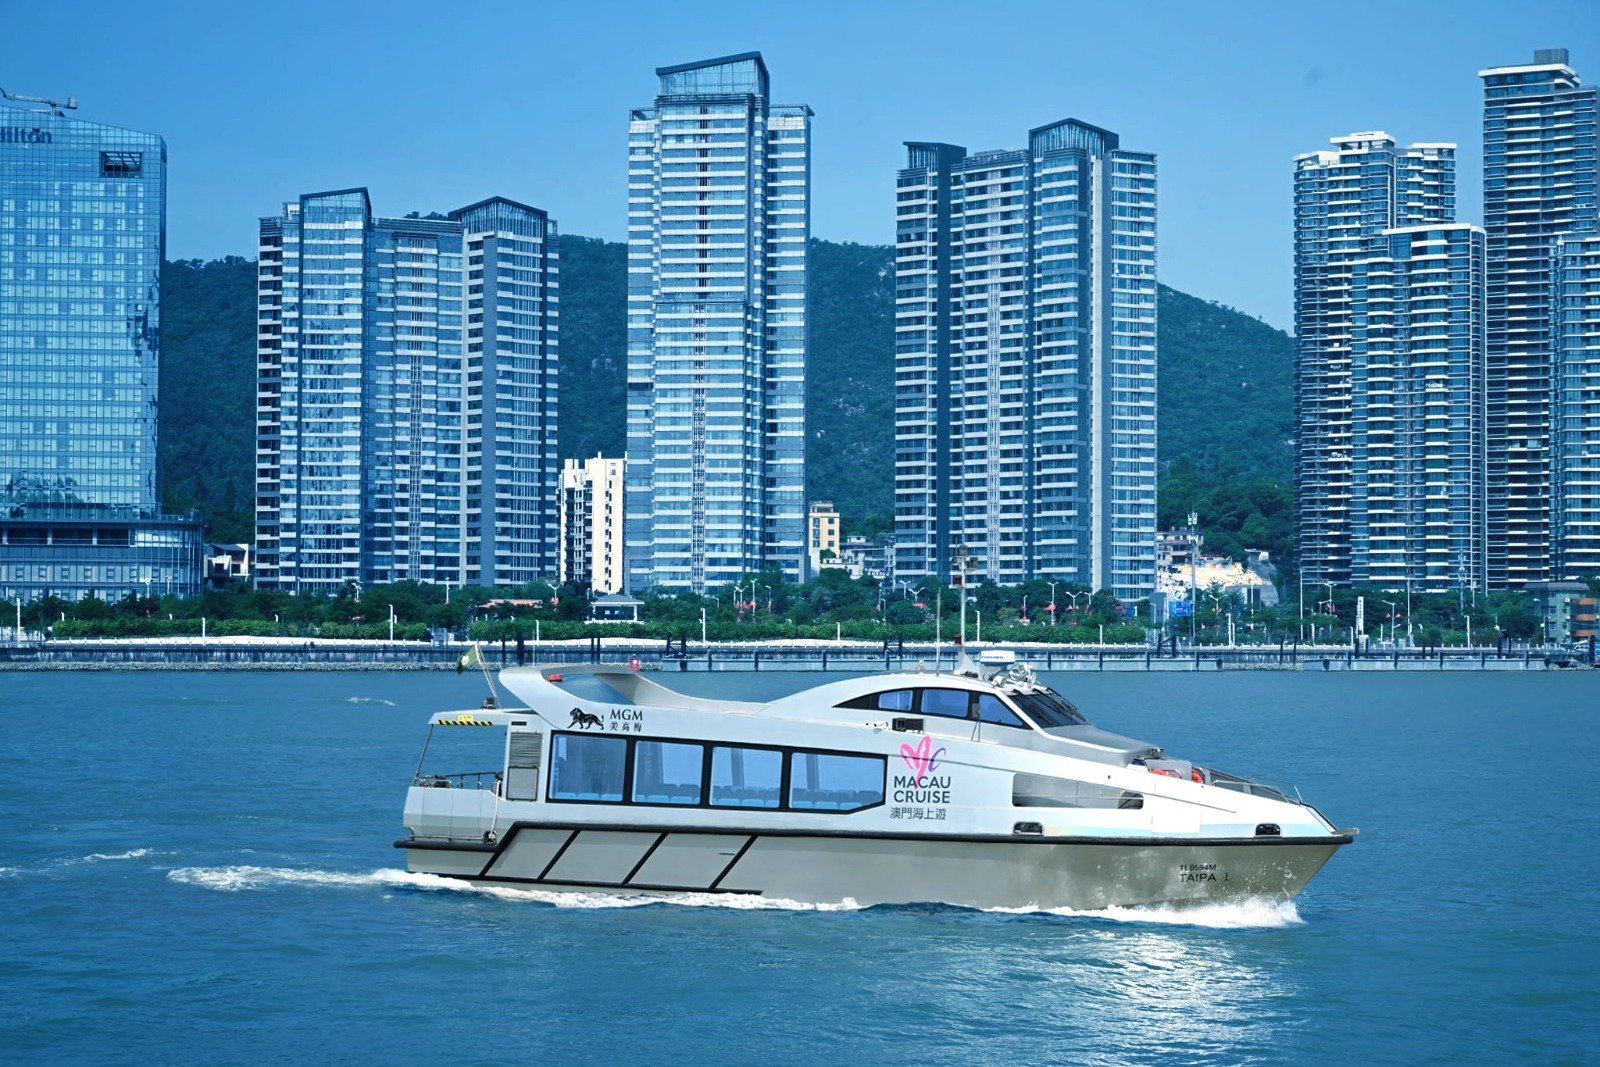 You can now take a sightseeing cruise from the Macao peninsula to Coloane